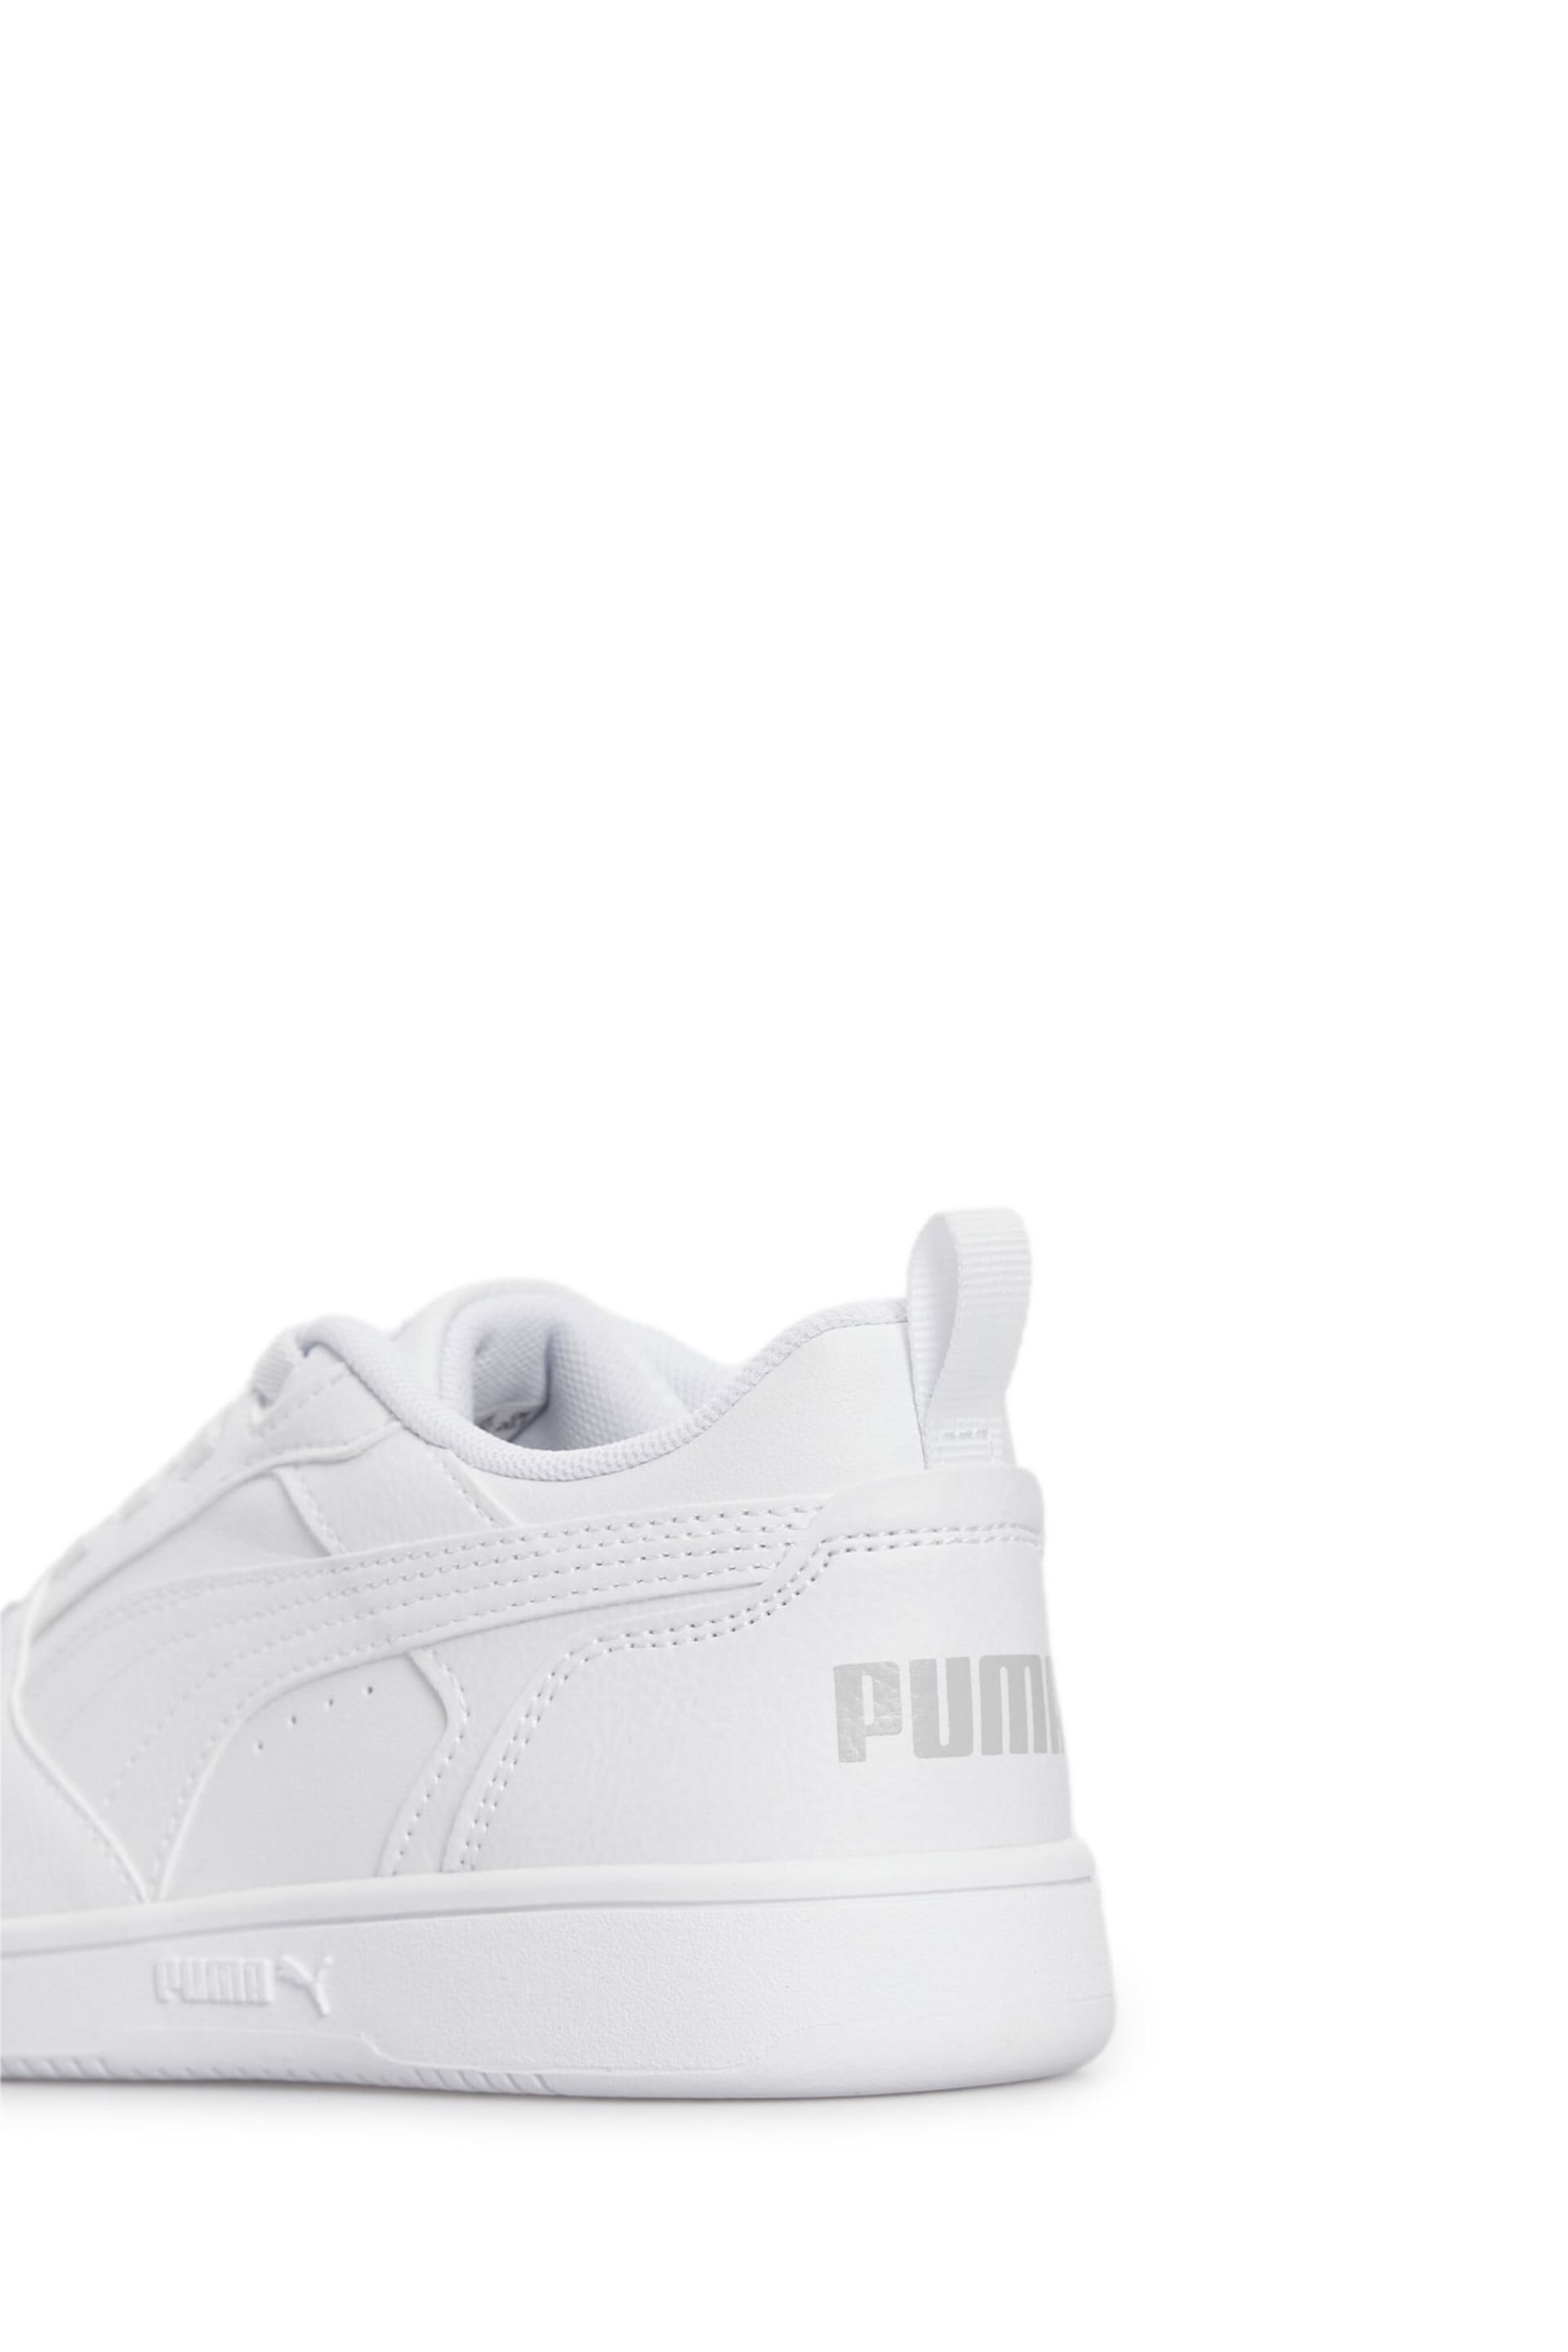 Puma White Unisex Kids Rebound V6 LO Sneakers Trainers - Image 6 of 6